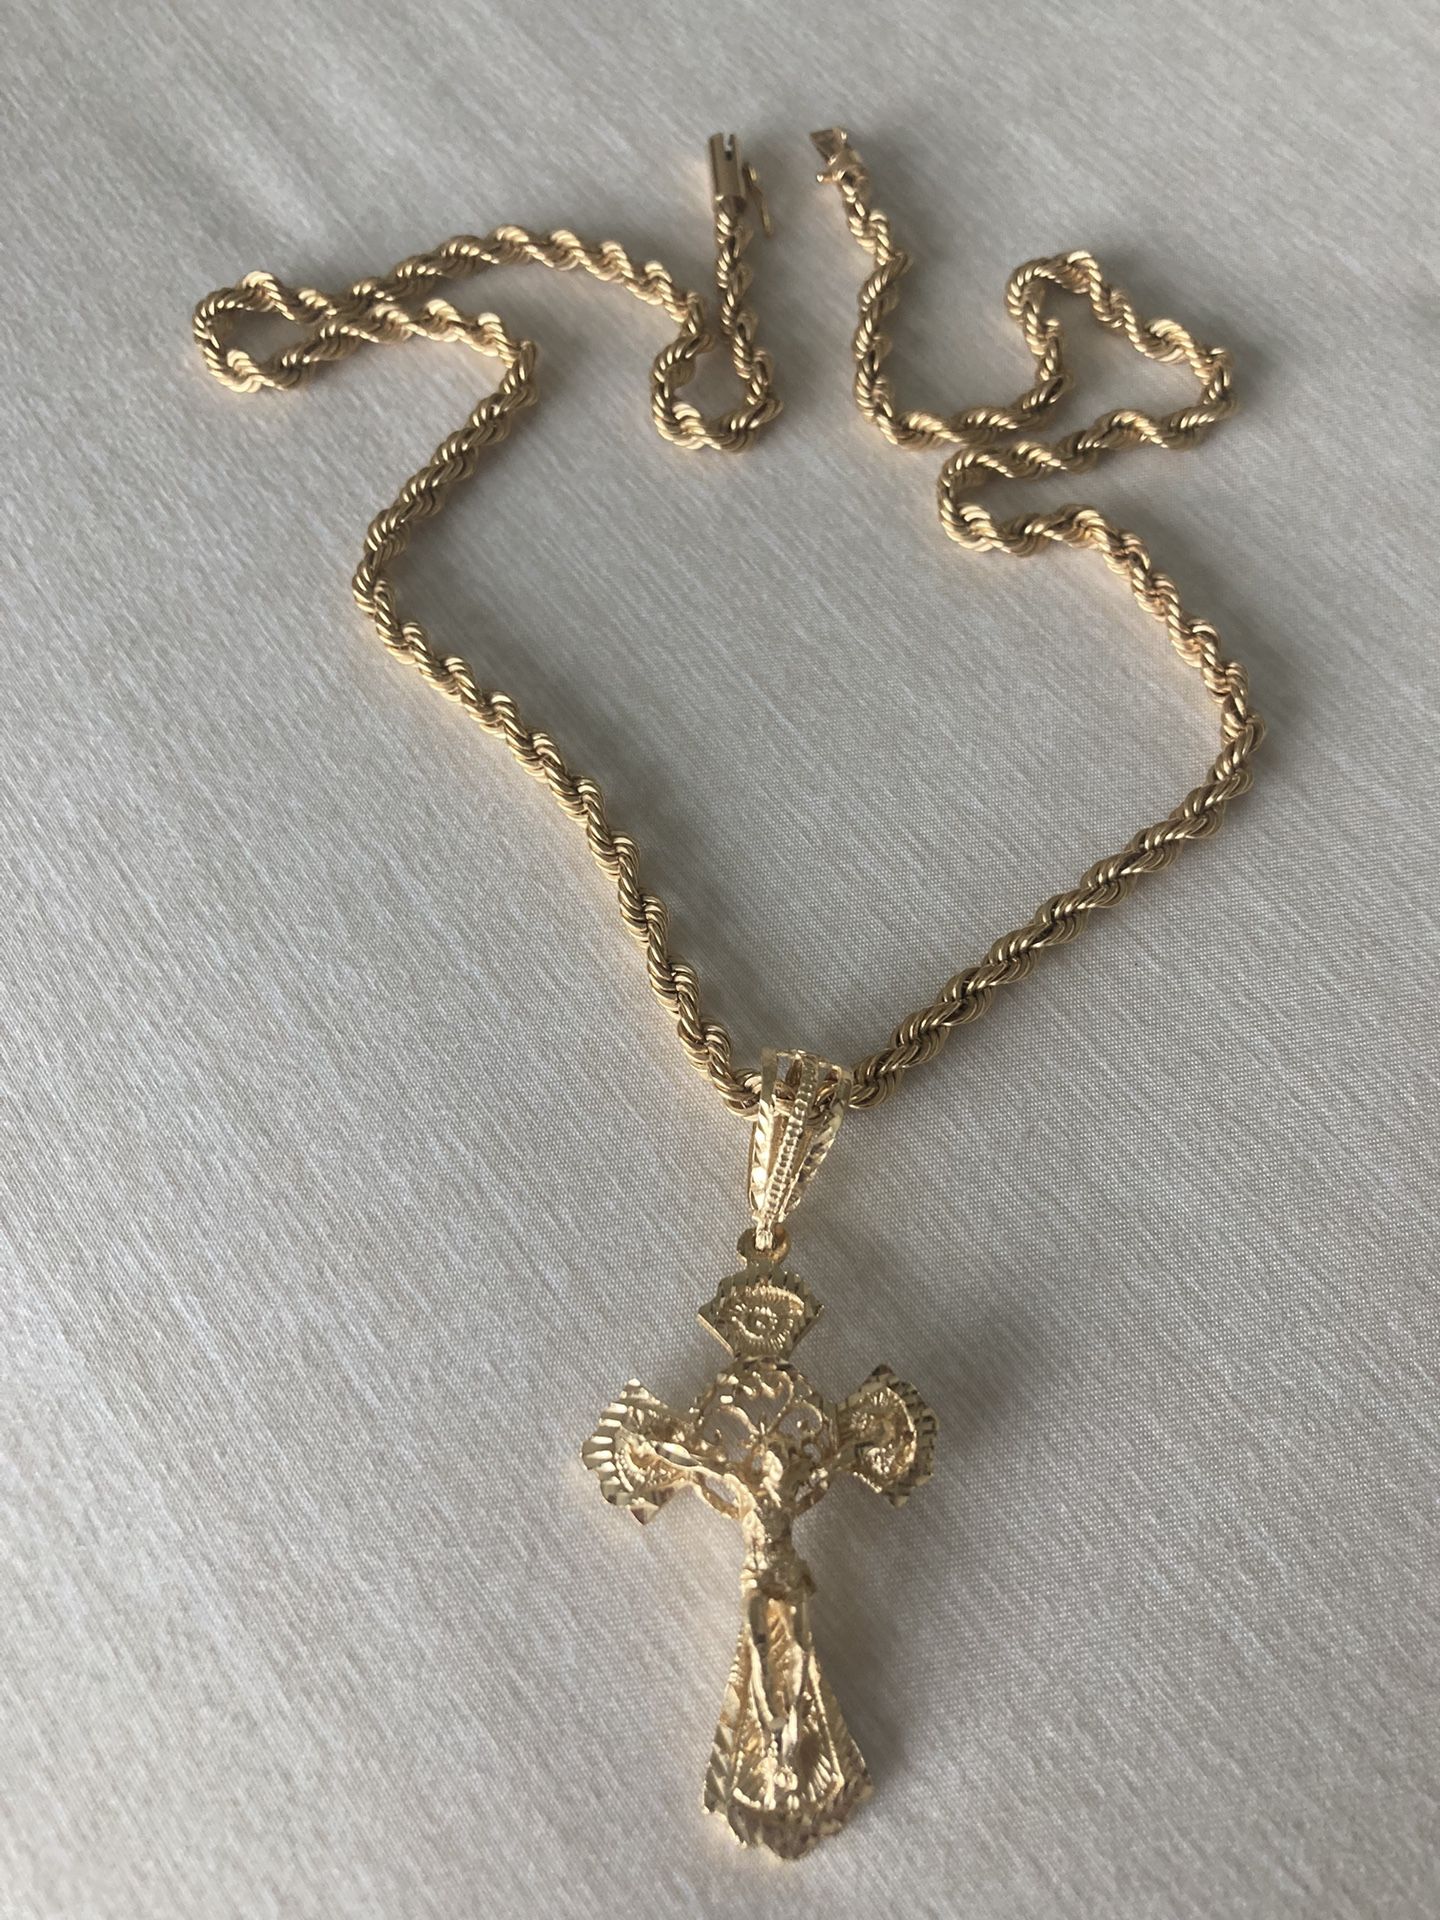 14K SOLID GOLD CHAIN AND CROSS